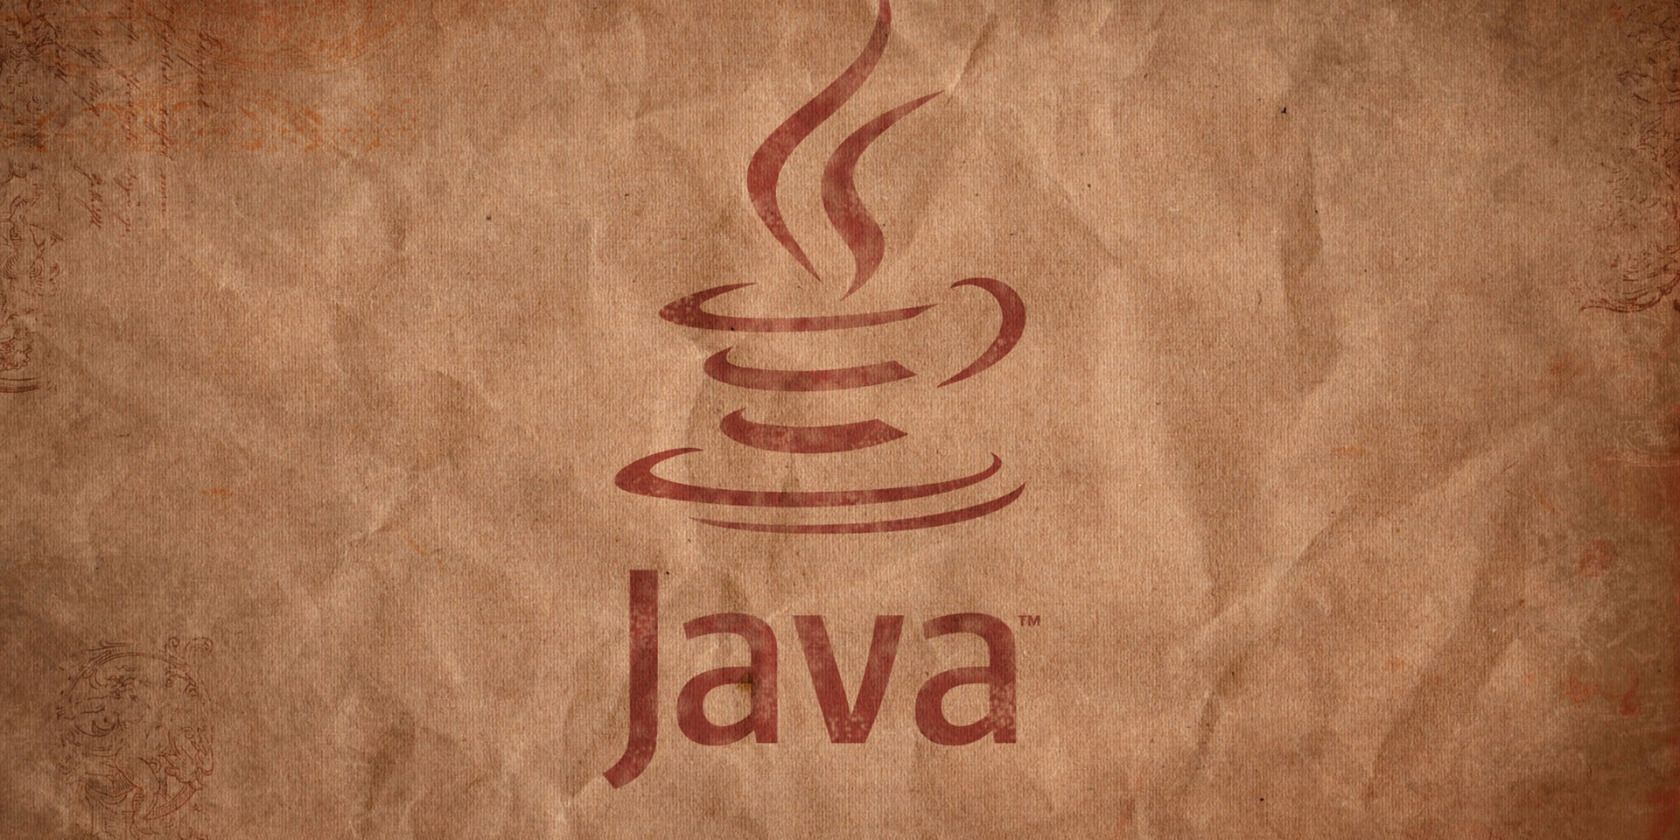 The Java logo sitting on a brown background image with a paper effect.